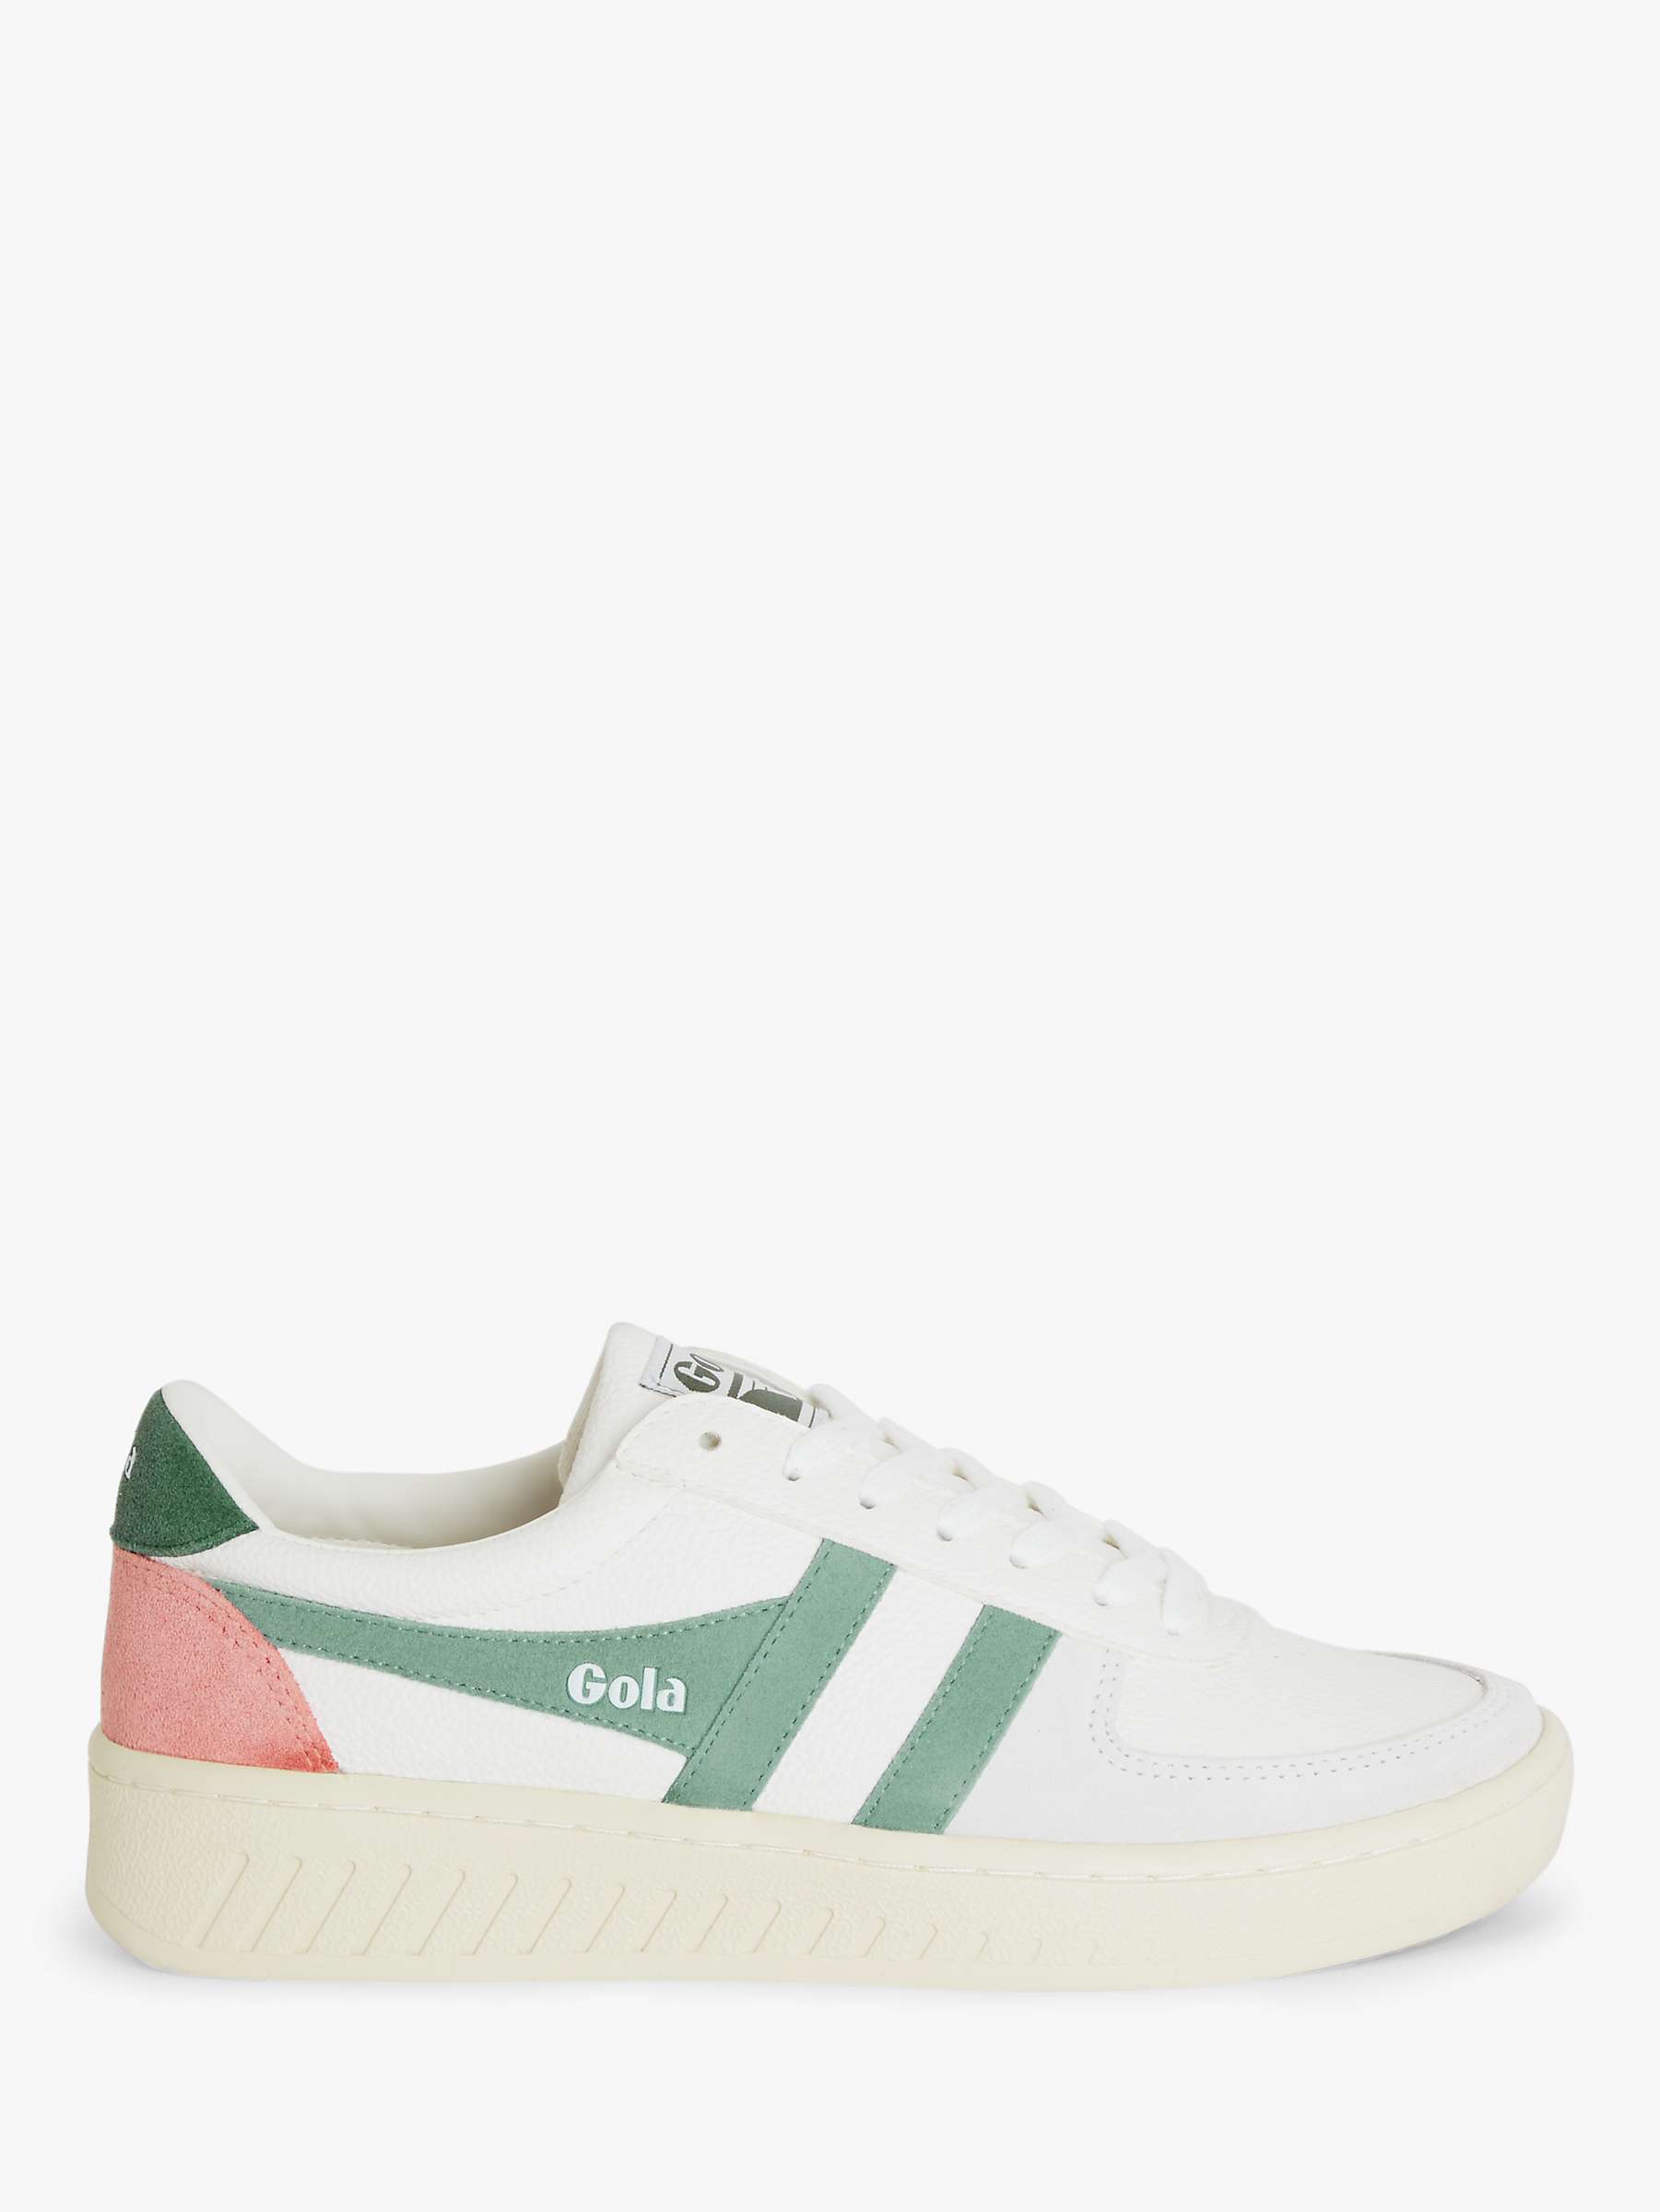 Gola Grandslam Leather Trainers, White/Green at John Lewis & Partners